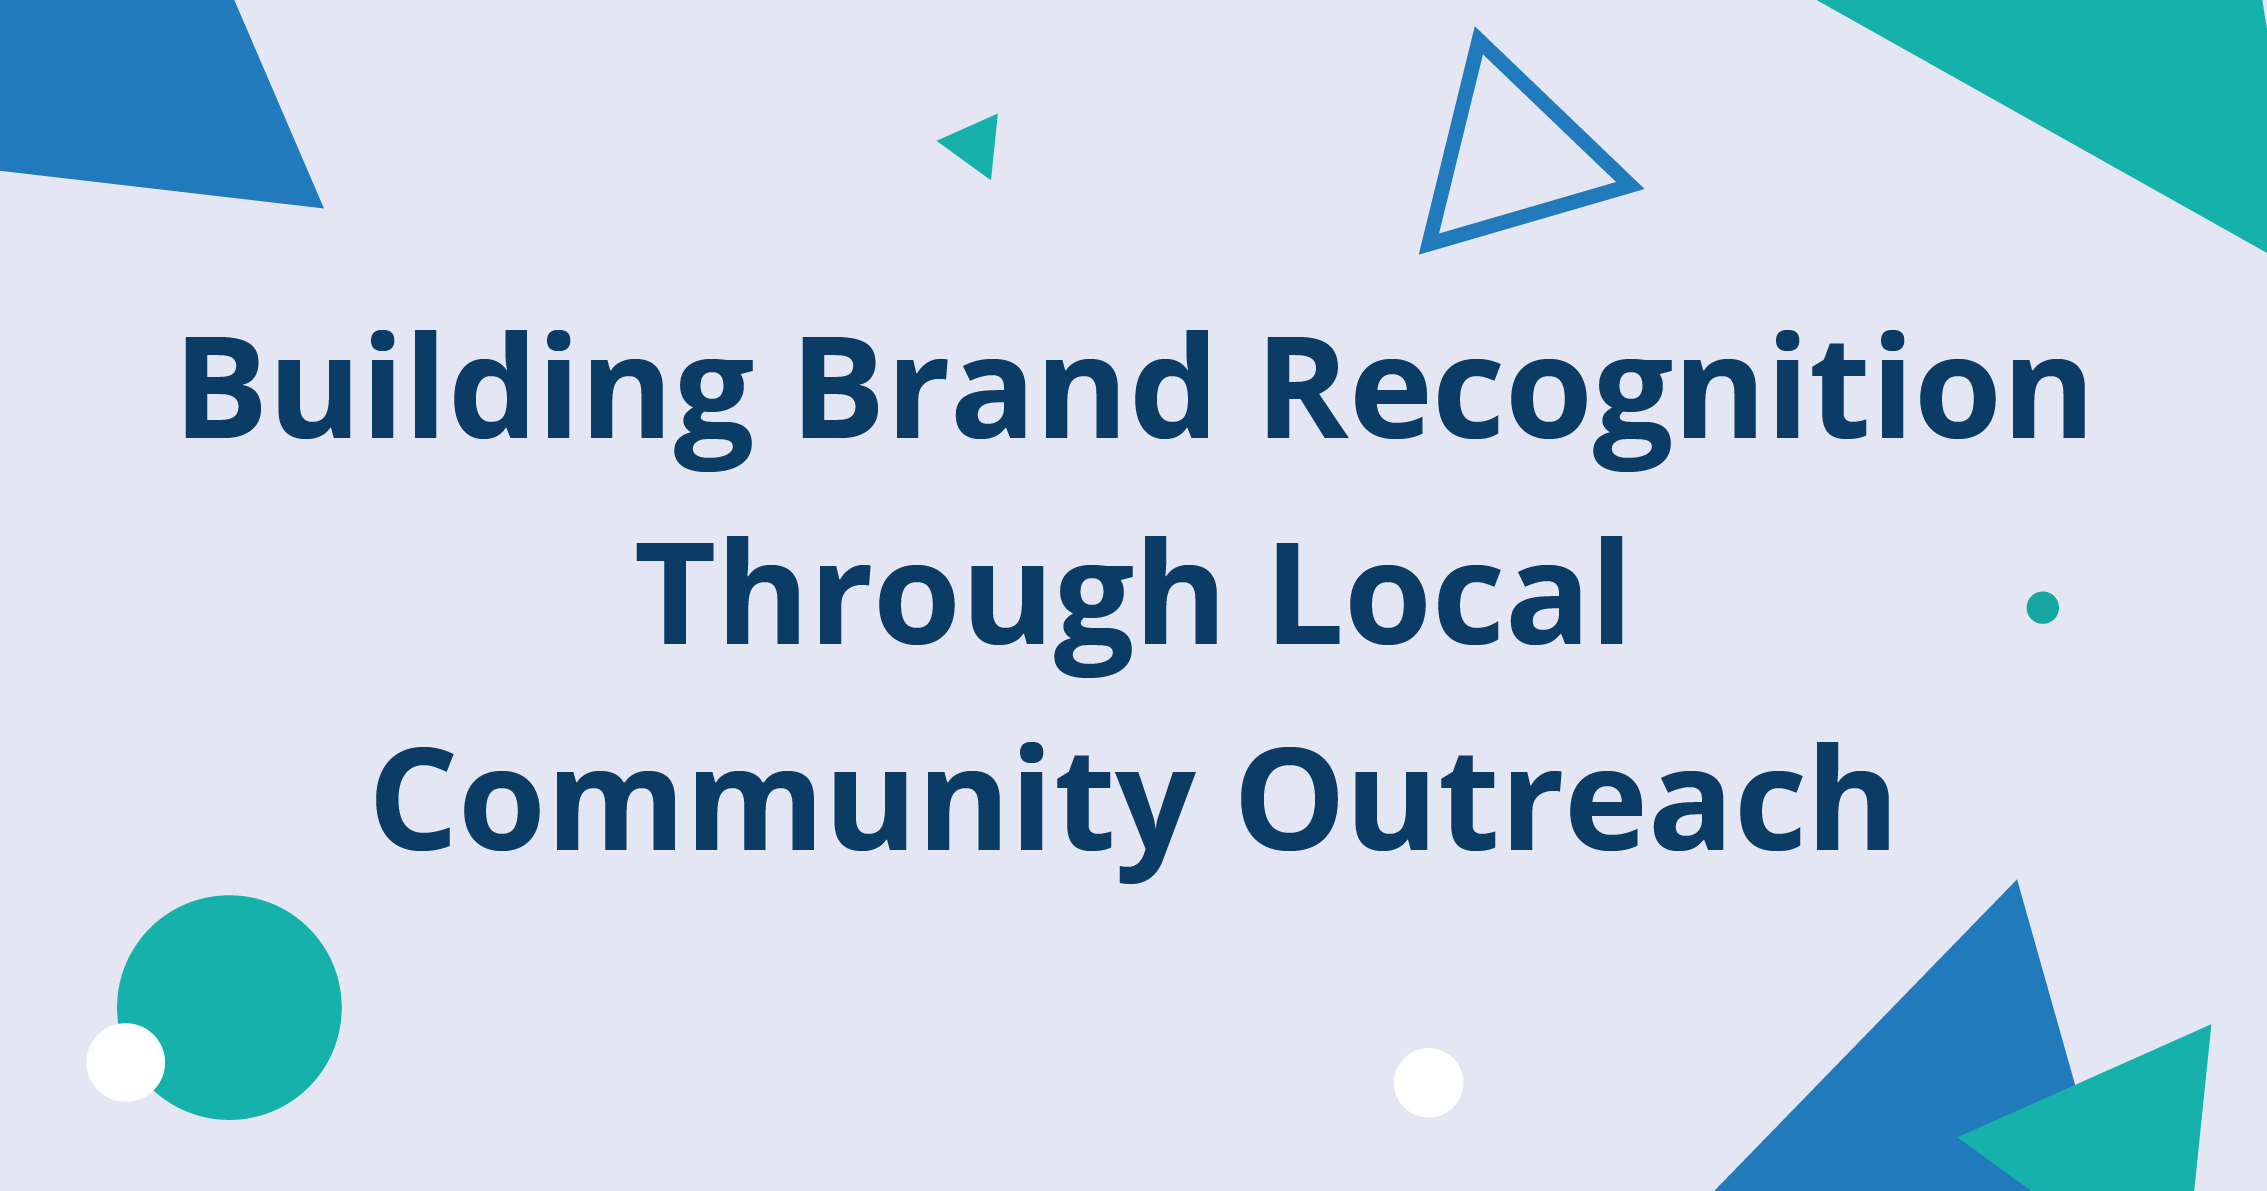 Building Brand Recognition Through Local Community Outreach